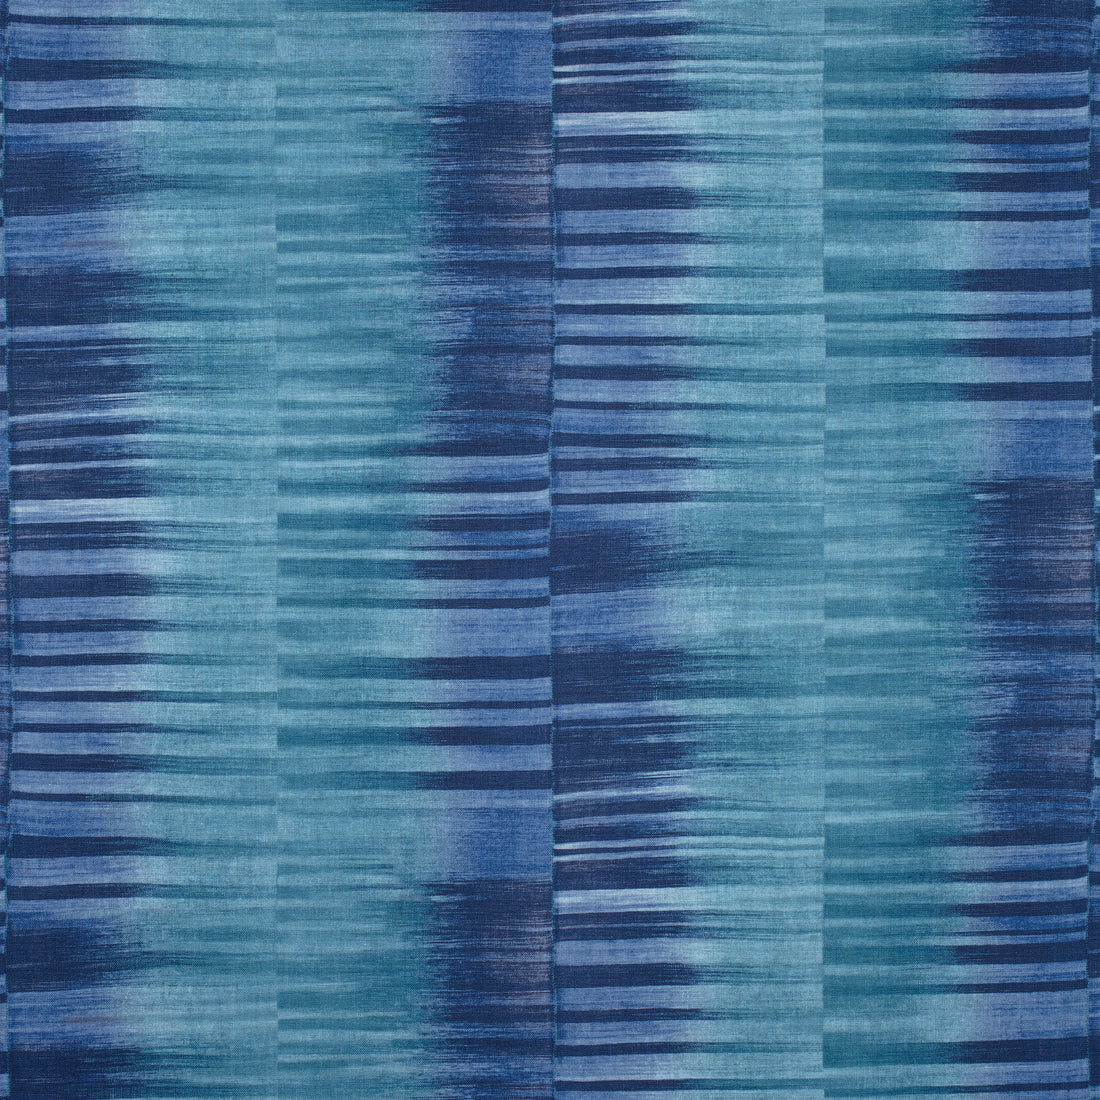 Mekong Stripe fabric in turquoise and navy color - pattern number F910088 - by Thibaut in the Tropics collection